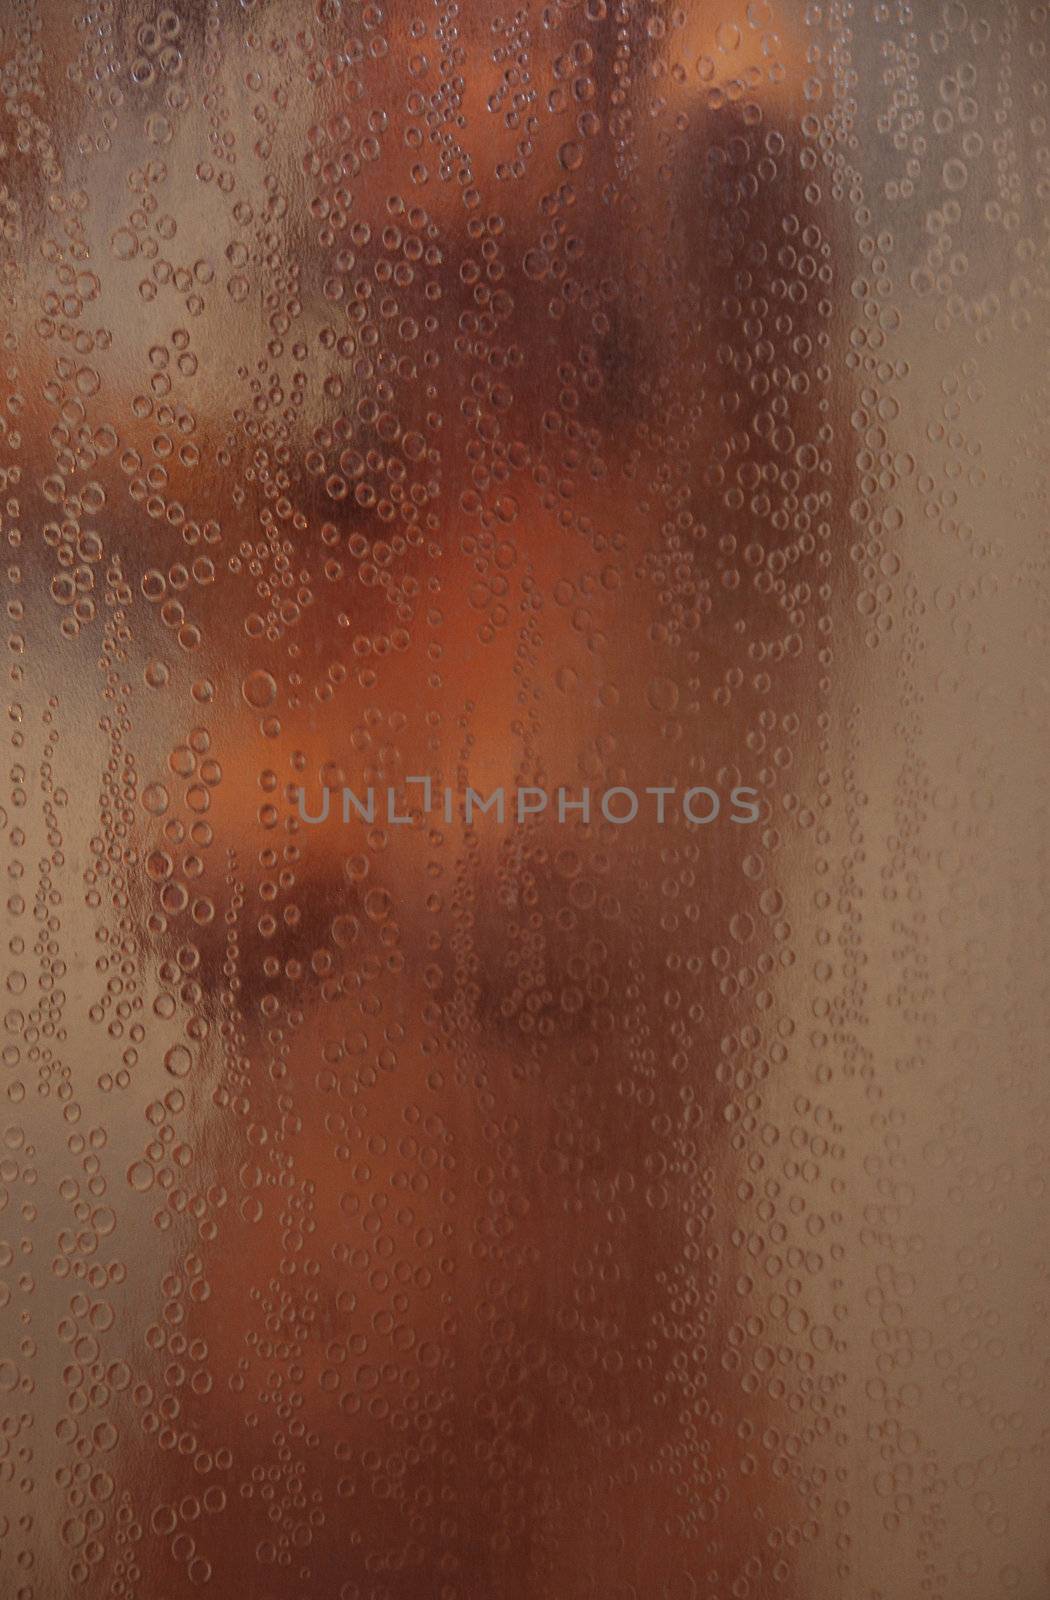 Showering 5 by photocdn39